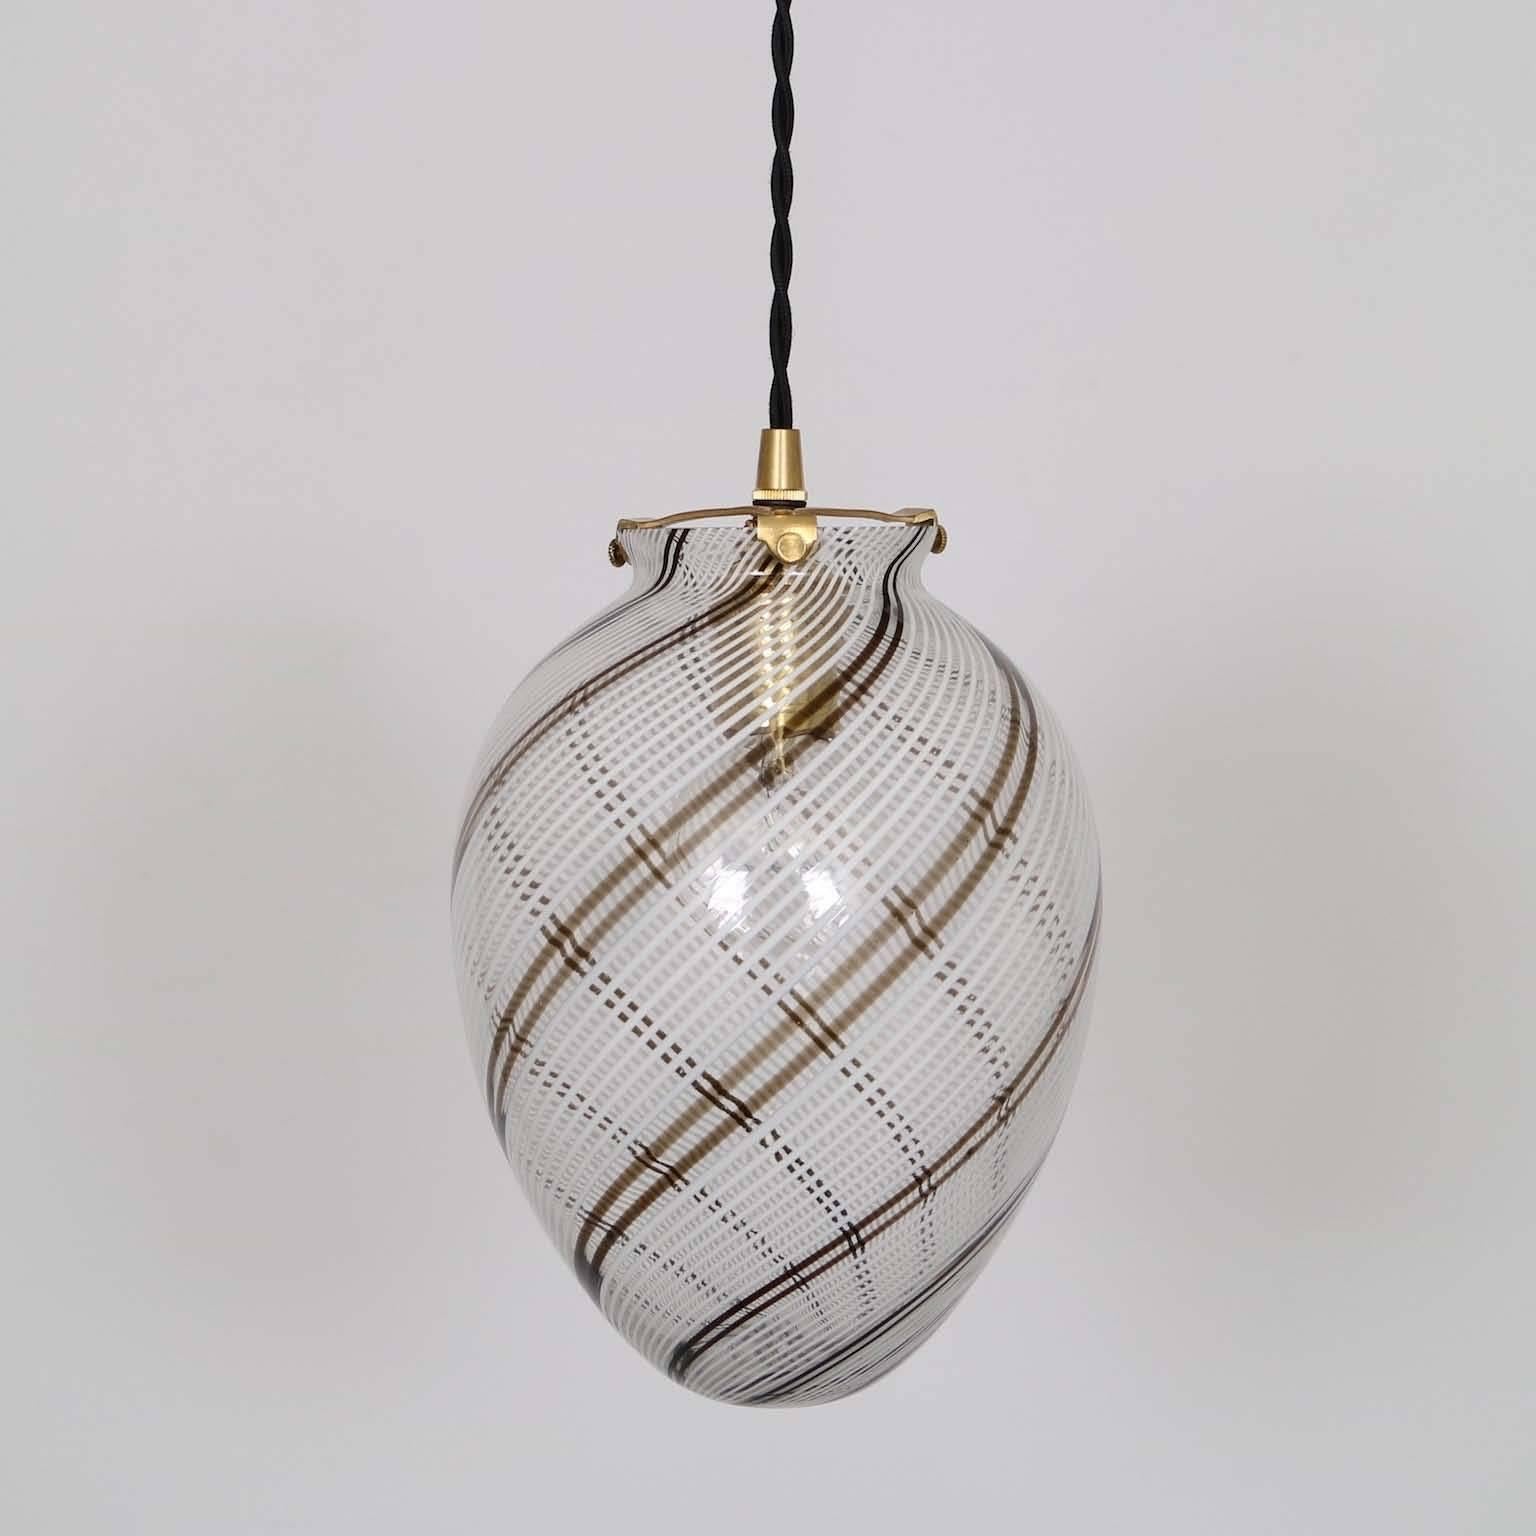 A 1960s Murano glass egg shaped pendant by Venini, with spiral bands in brown and white. Includes three arm brass mount. The length of the electrical cable can be altered upon request. Very good vintage condition, wear consistent with age and use.